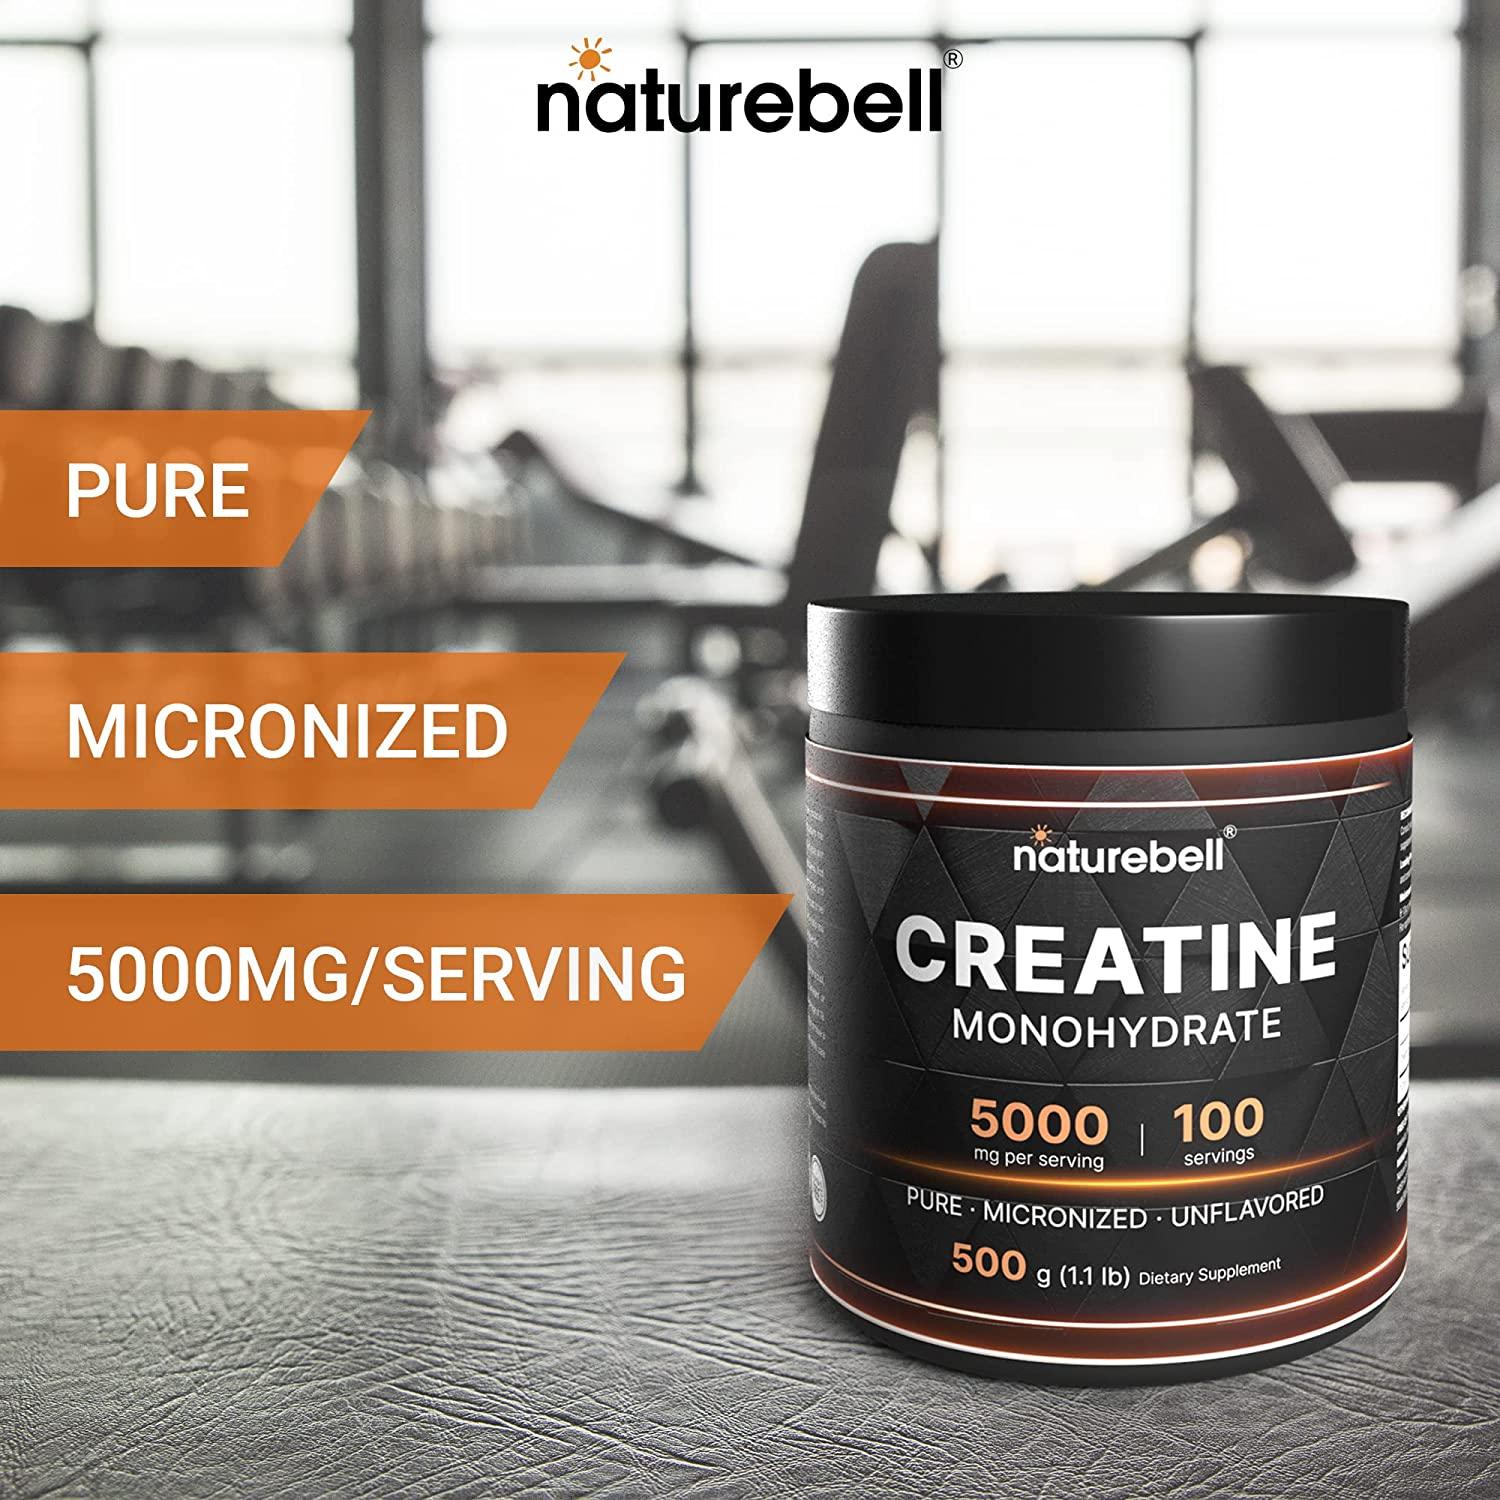 It's Just! - Creatine Monohydrate Powder, Pure Creatine Powder, Made in USA, 3rd Party Lab Tested, 5G per Serving, Scoop Included, No Fillers, No